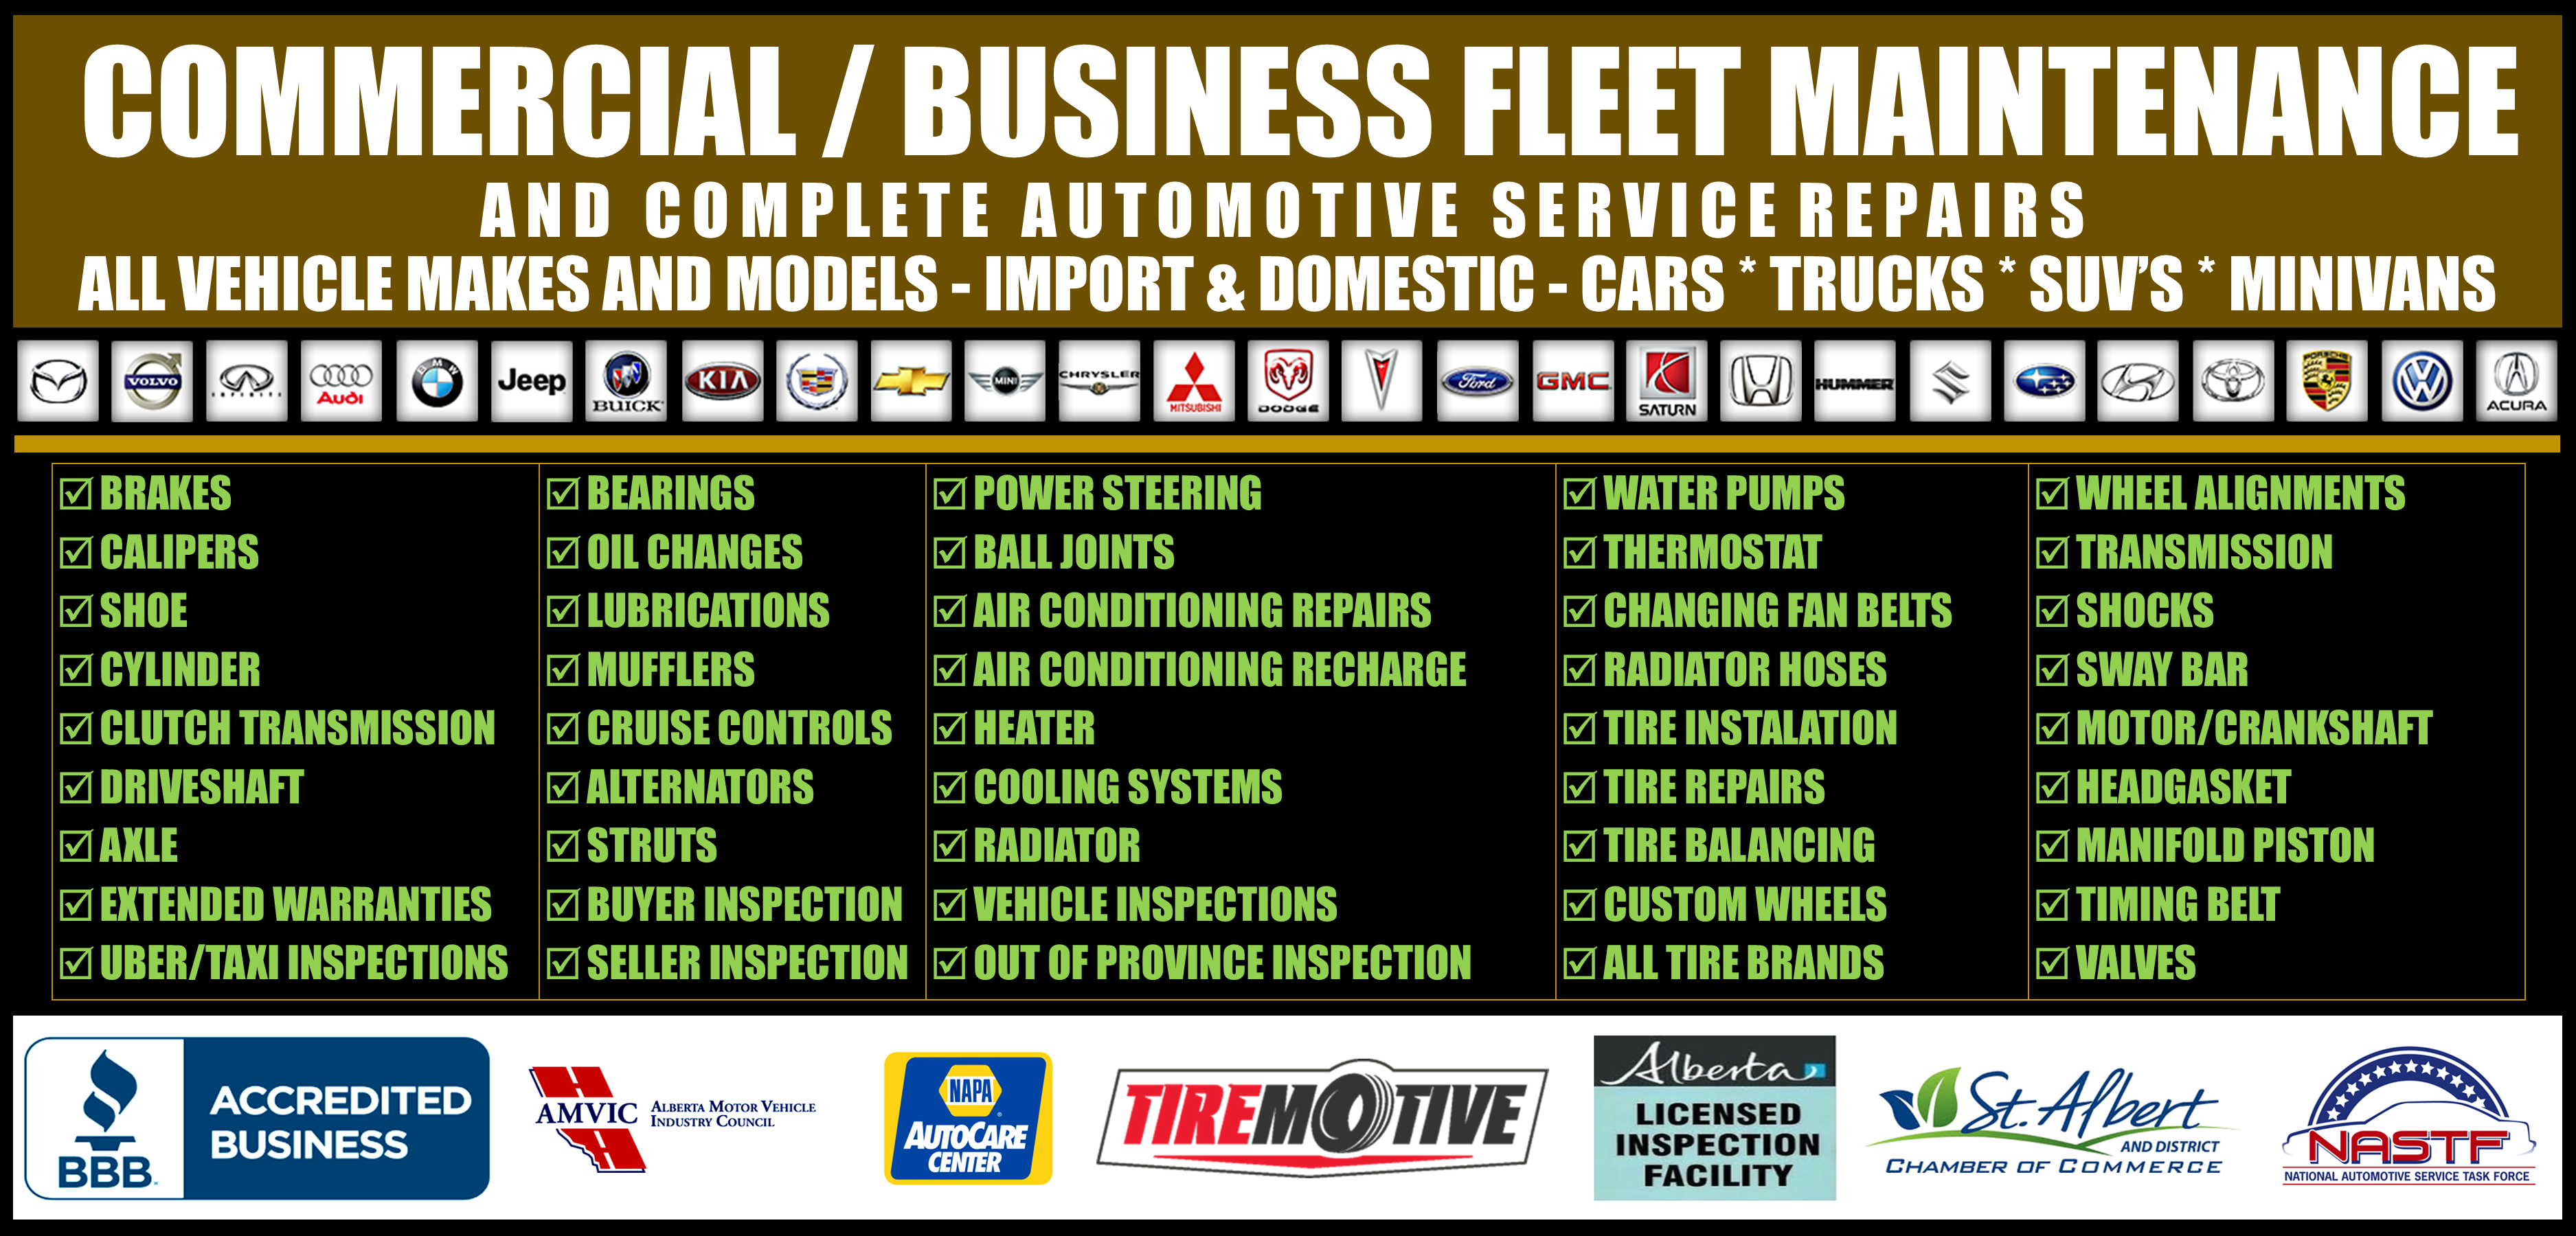 Commercial/Business Fleet Maintenance and Complete Automotive Service Repairs available to all 